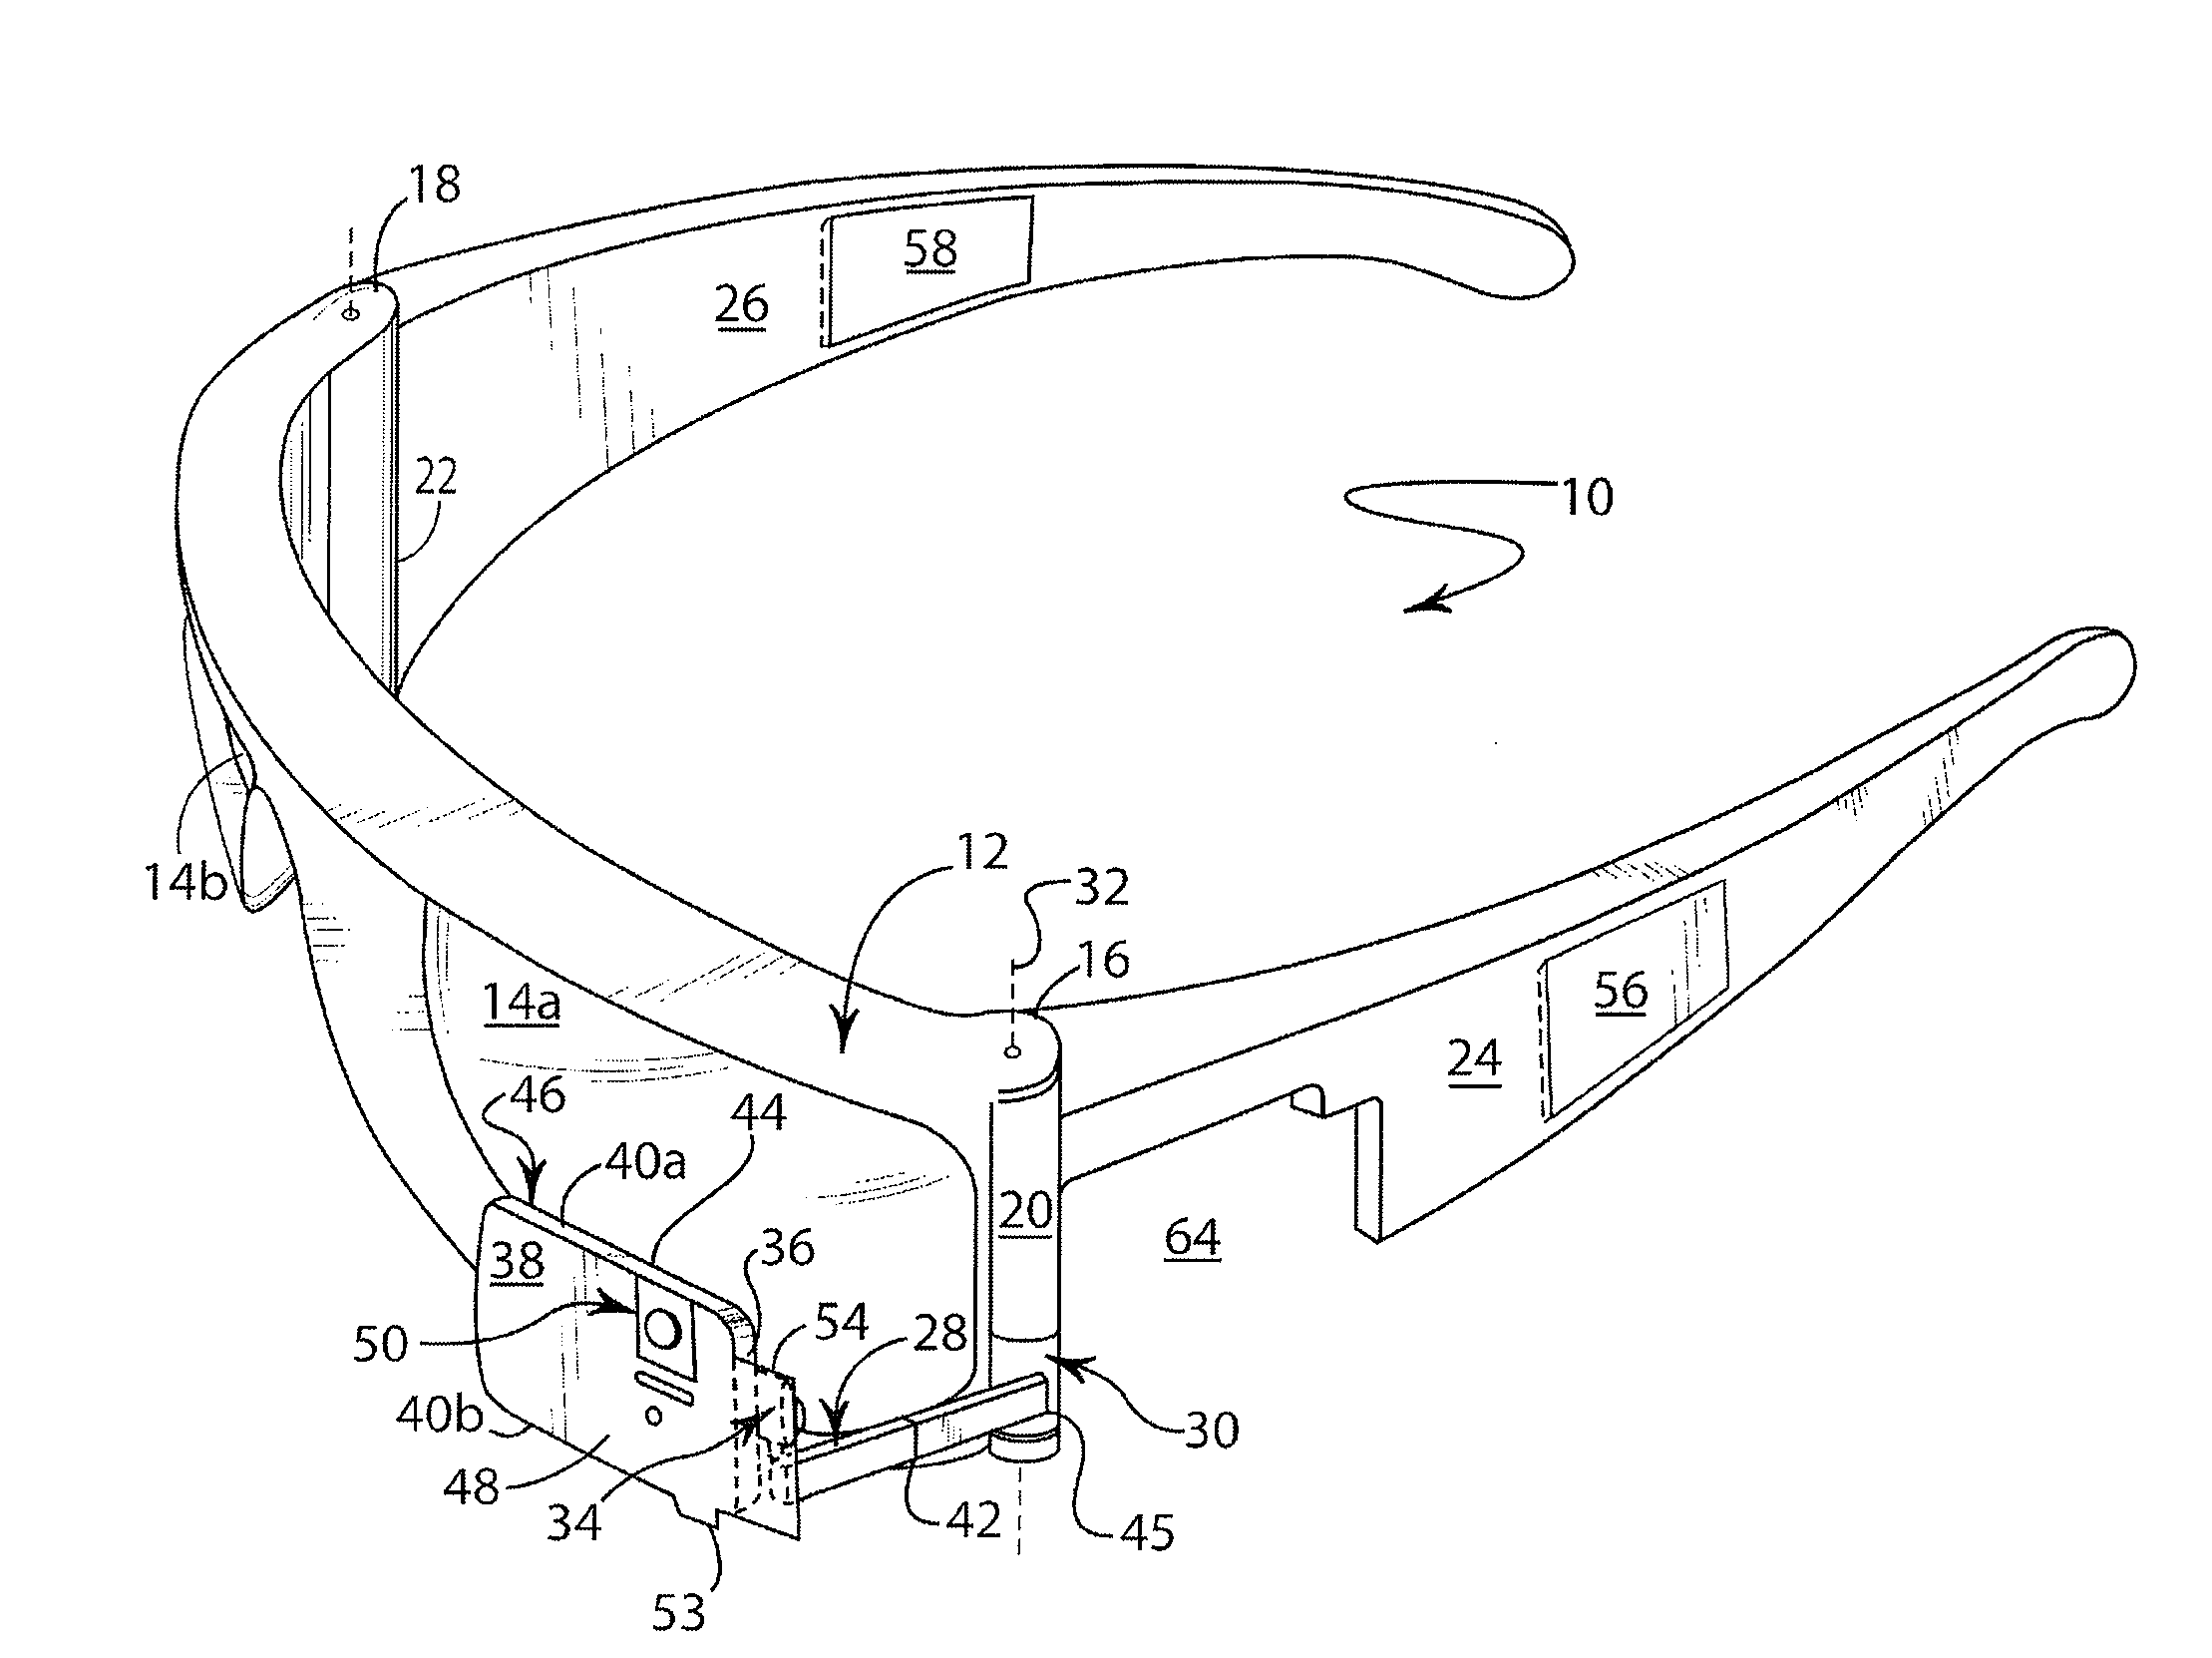 Eyeglasses with integrated video display